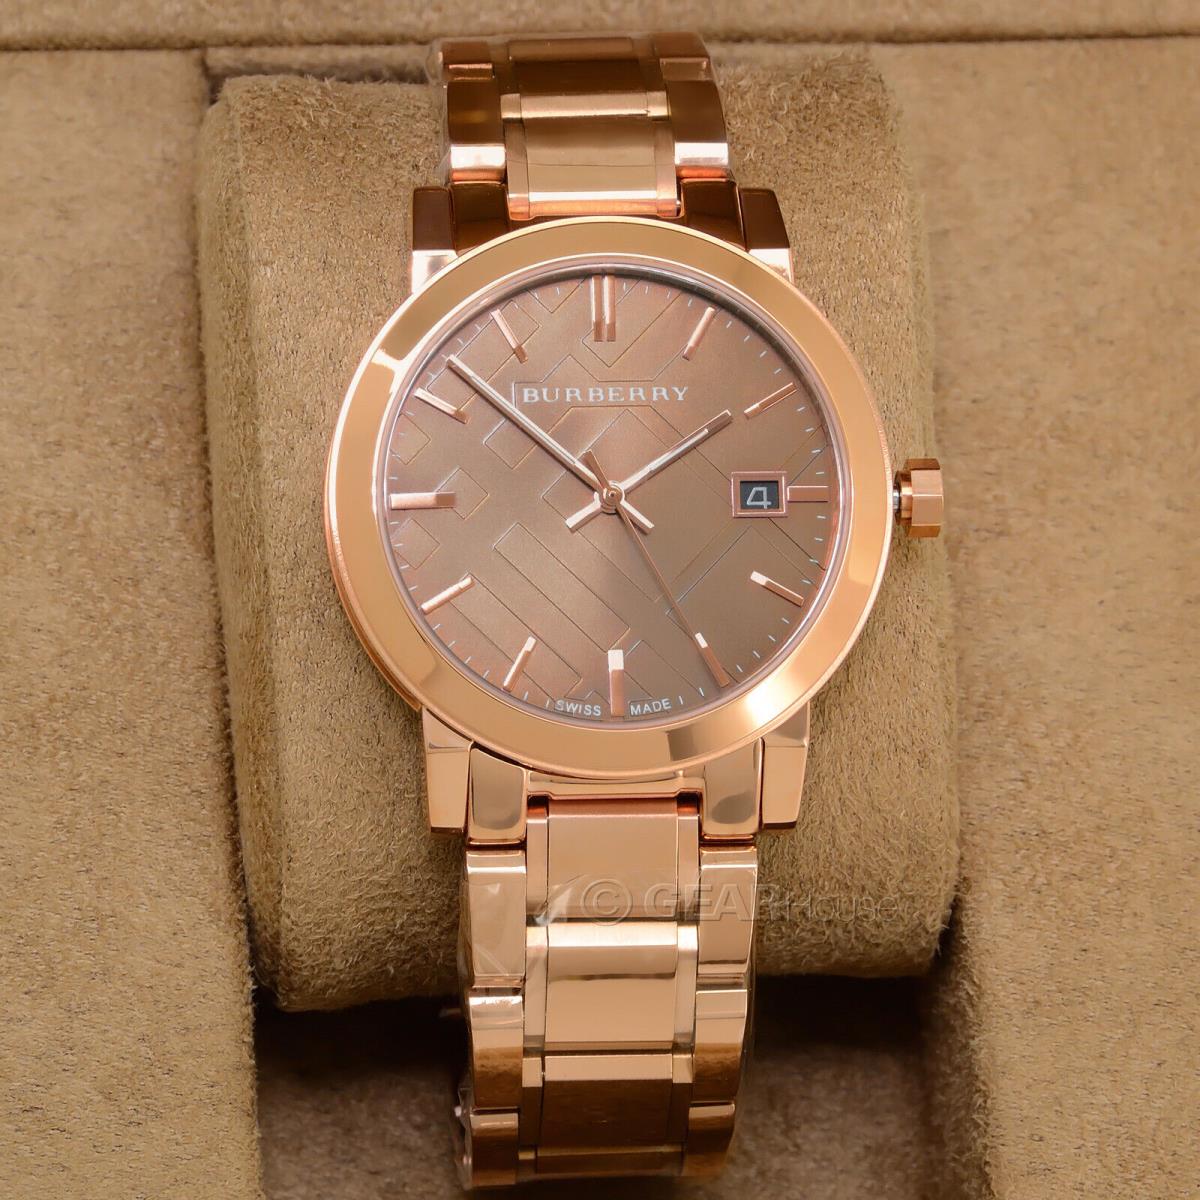 Burberry watch City - Brown Dial, Rose Gold Band, Rose Gold Bezel 1